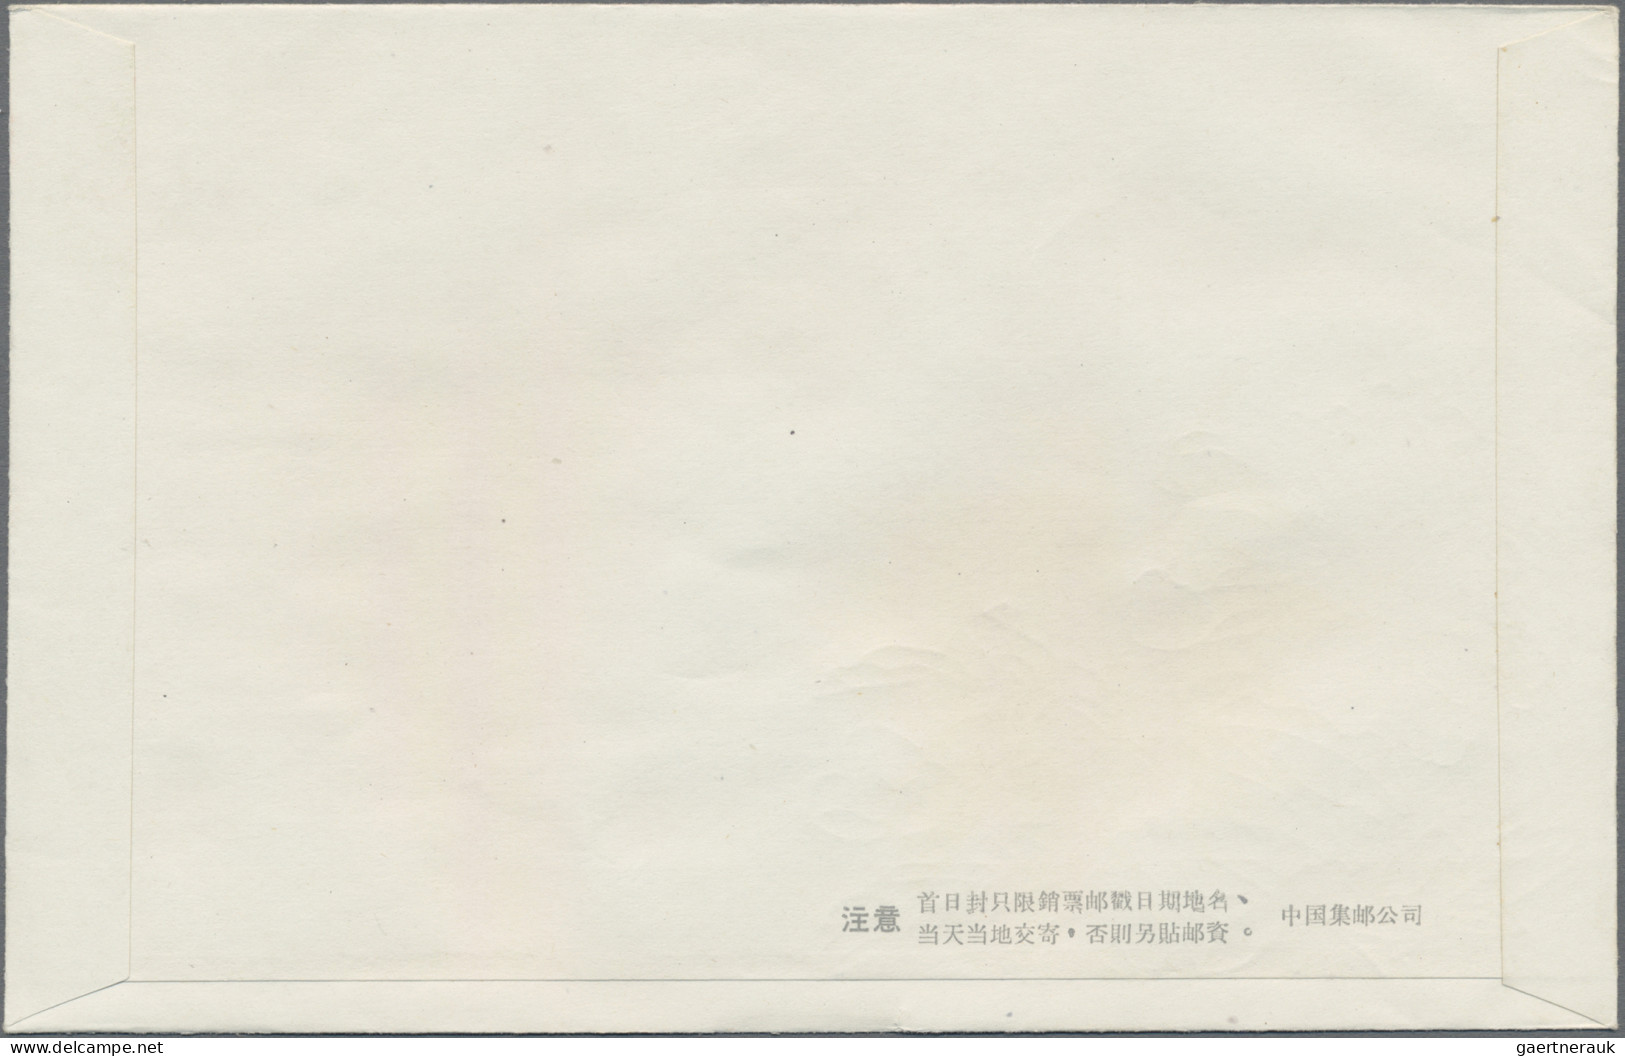 China (PRC): 1964, Peonies Set (S61) On Three Unaddressed Cacheted Official FDC, - Lettres & Documents